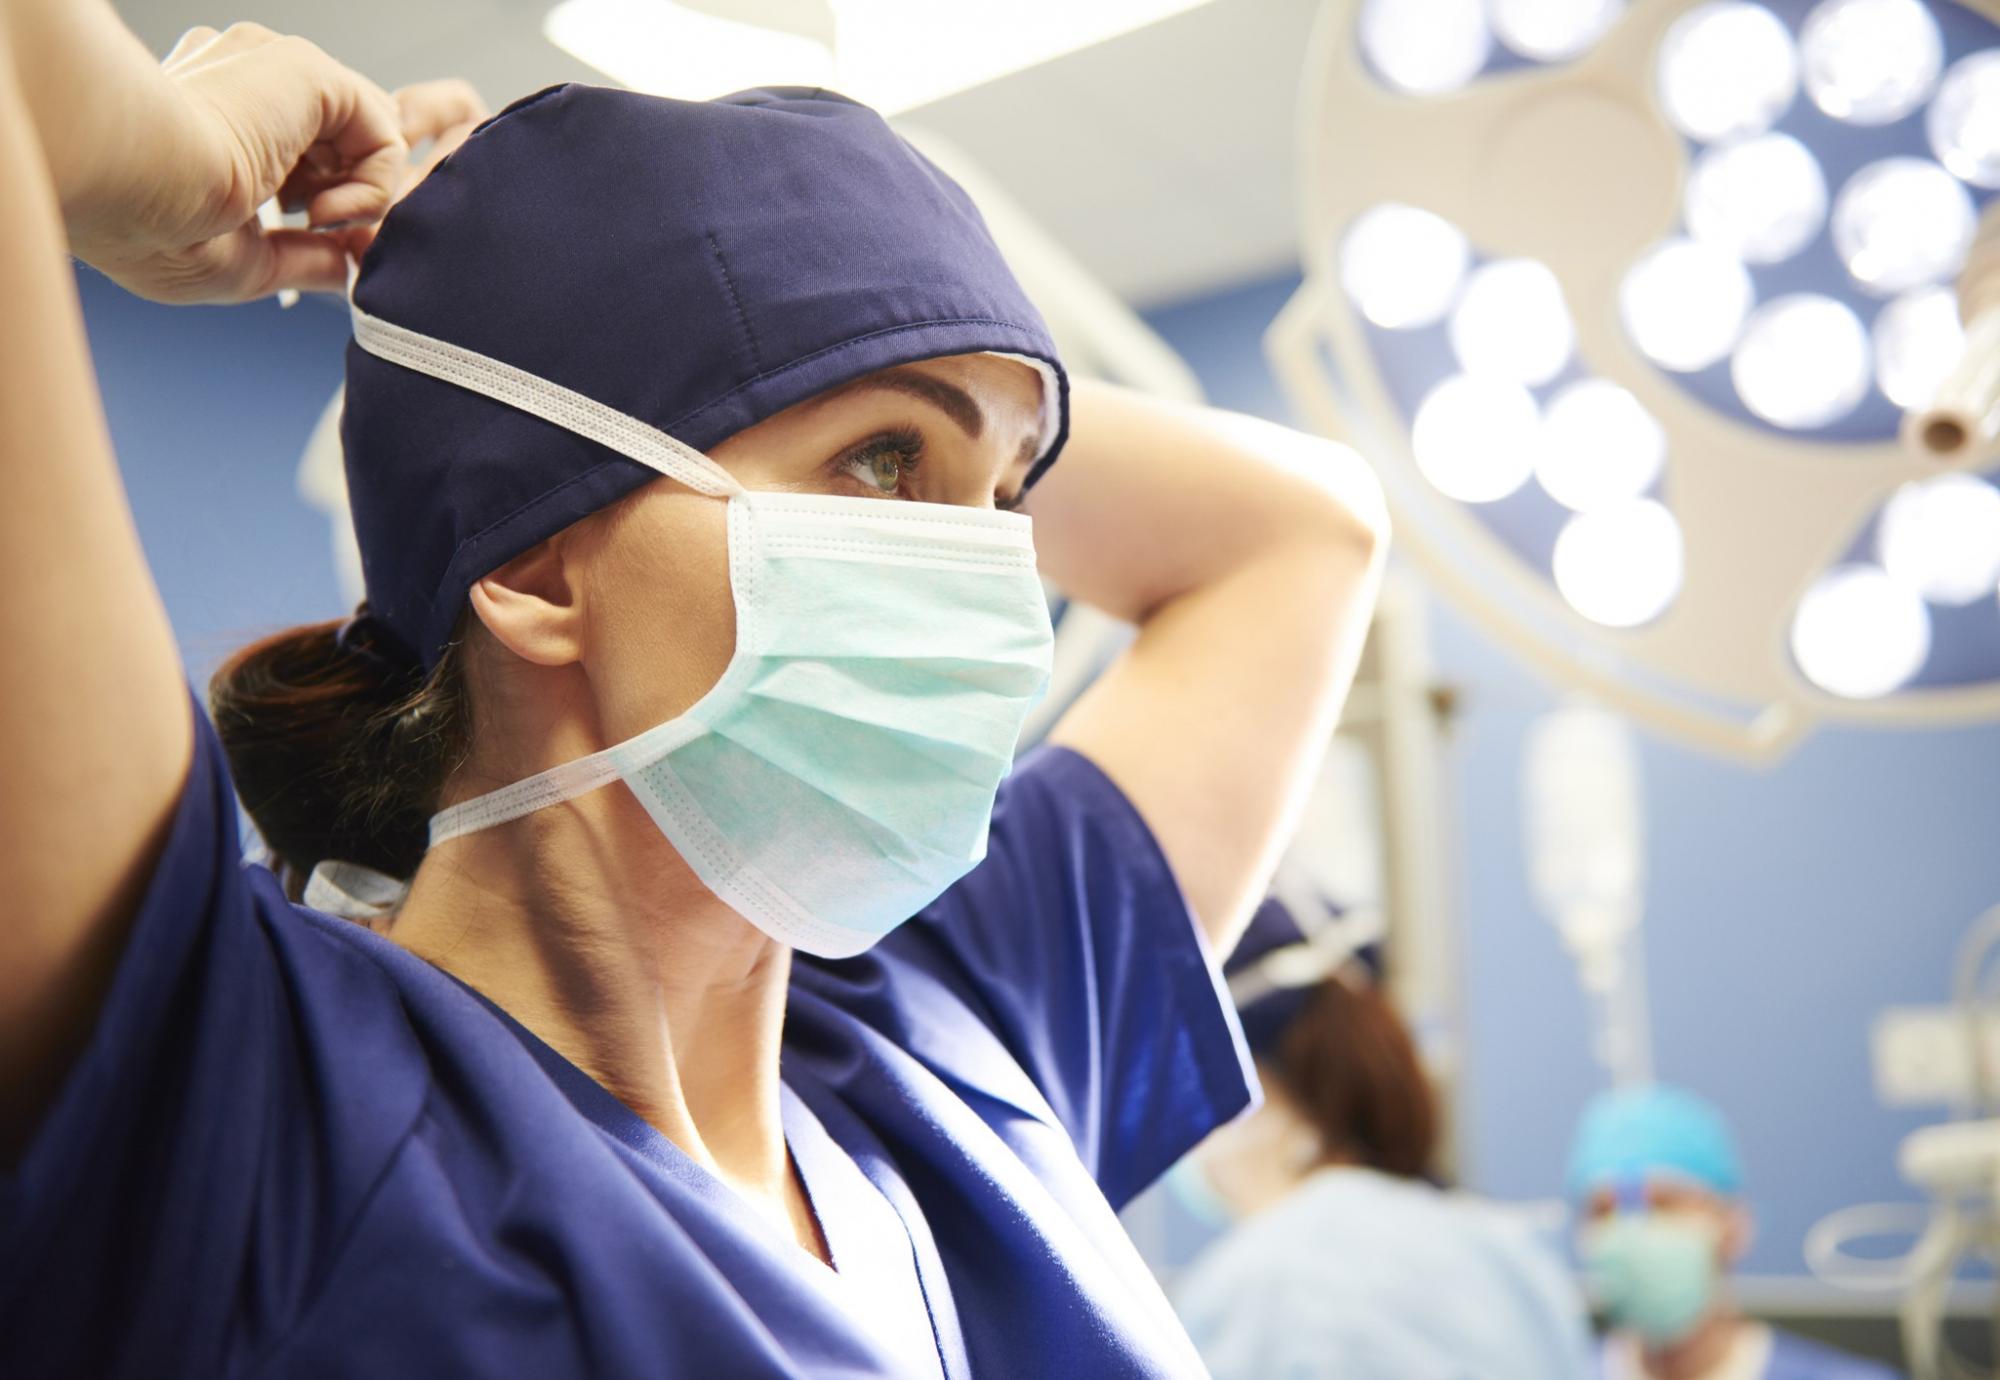 Female health professional tying a surgical mask